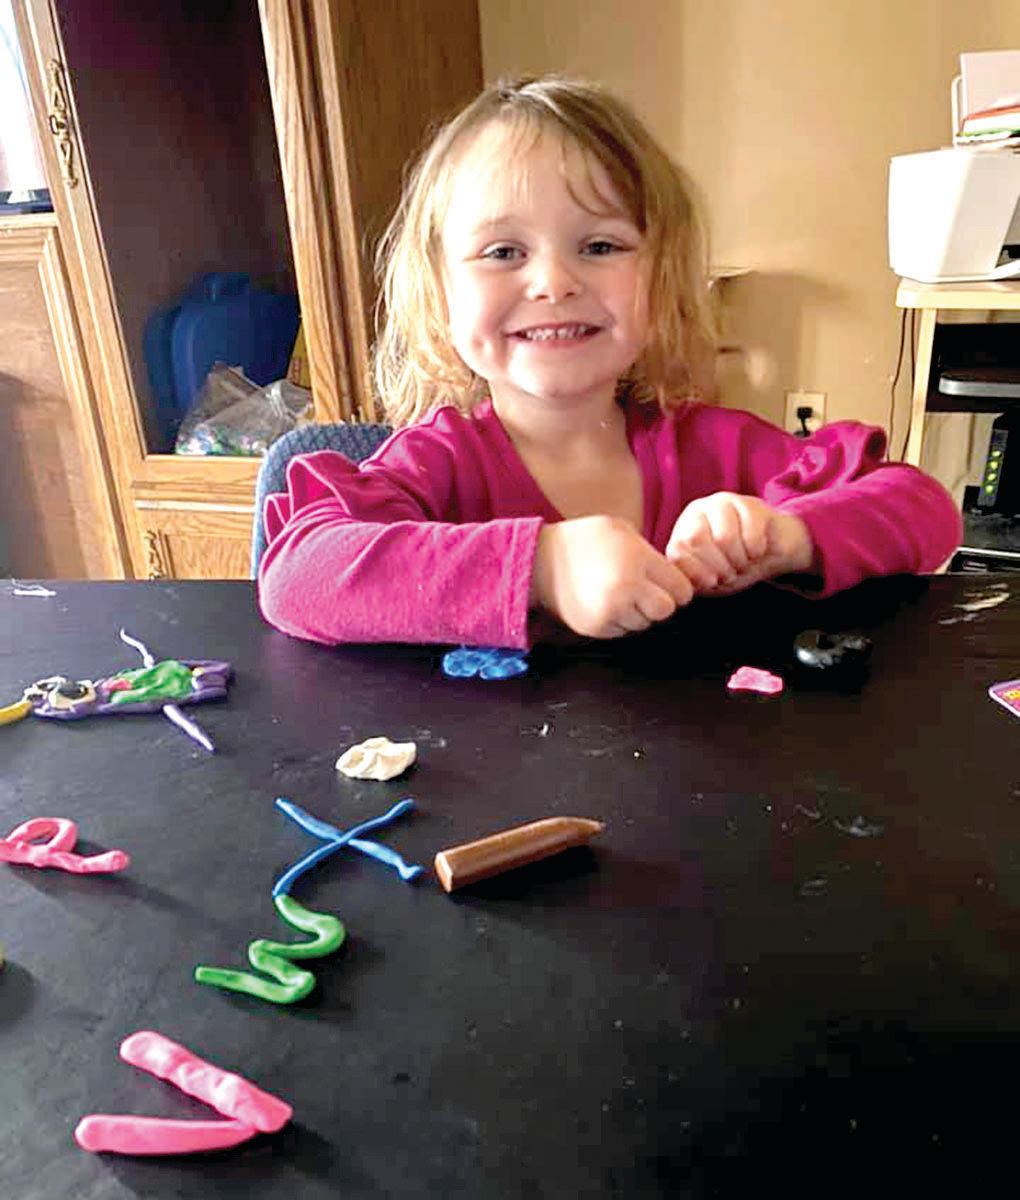 Rylee Sneller plays with ABCs and monsters made of clay.